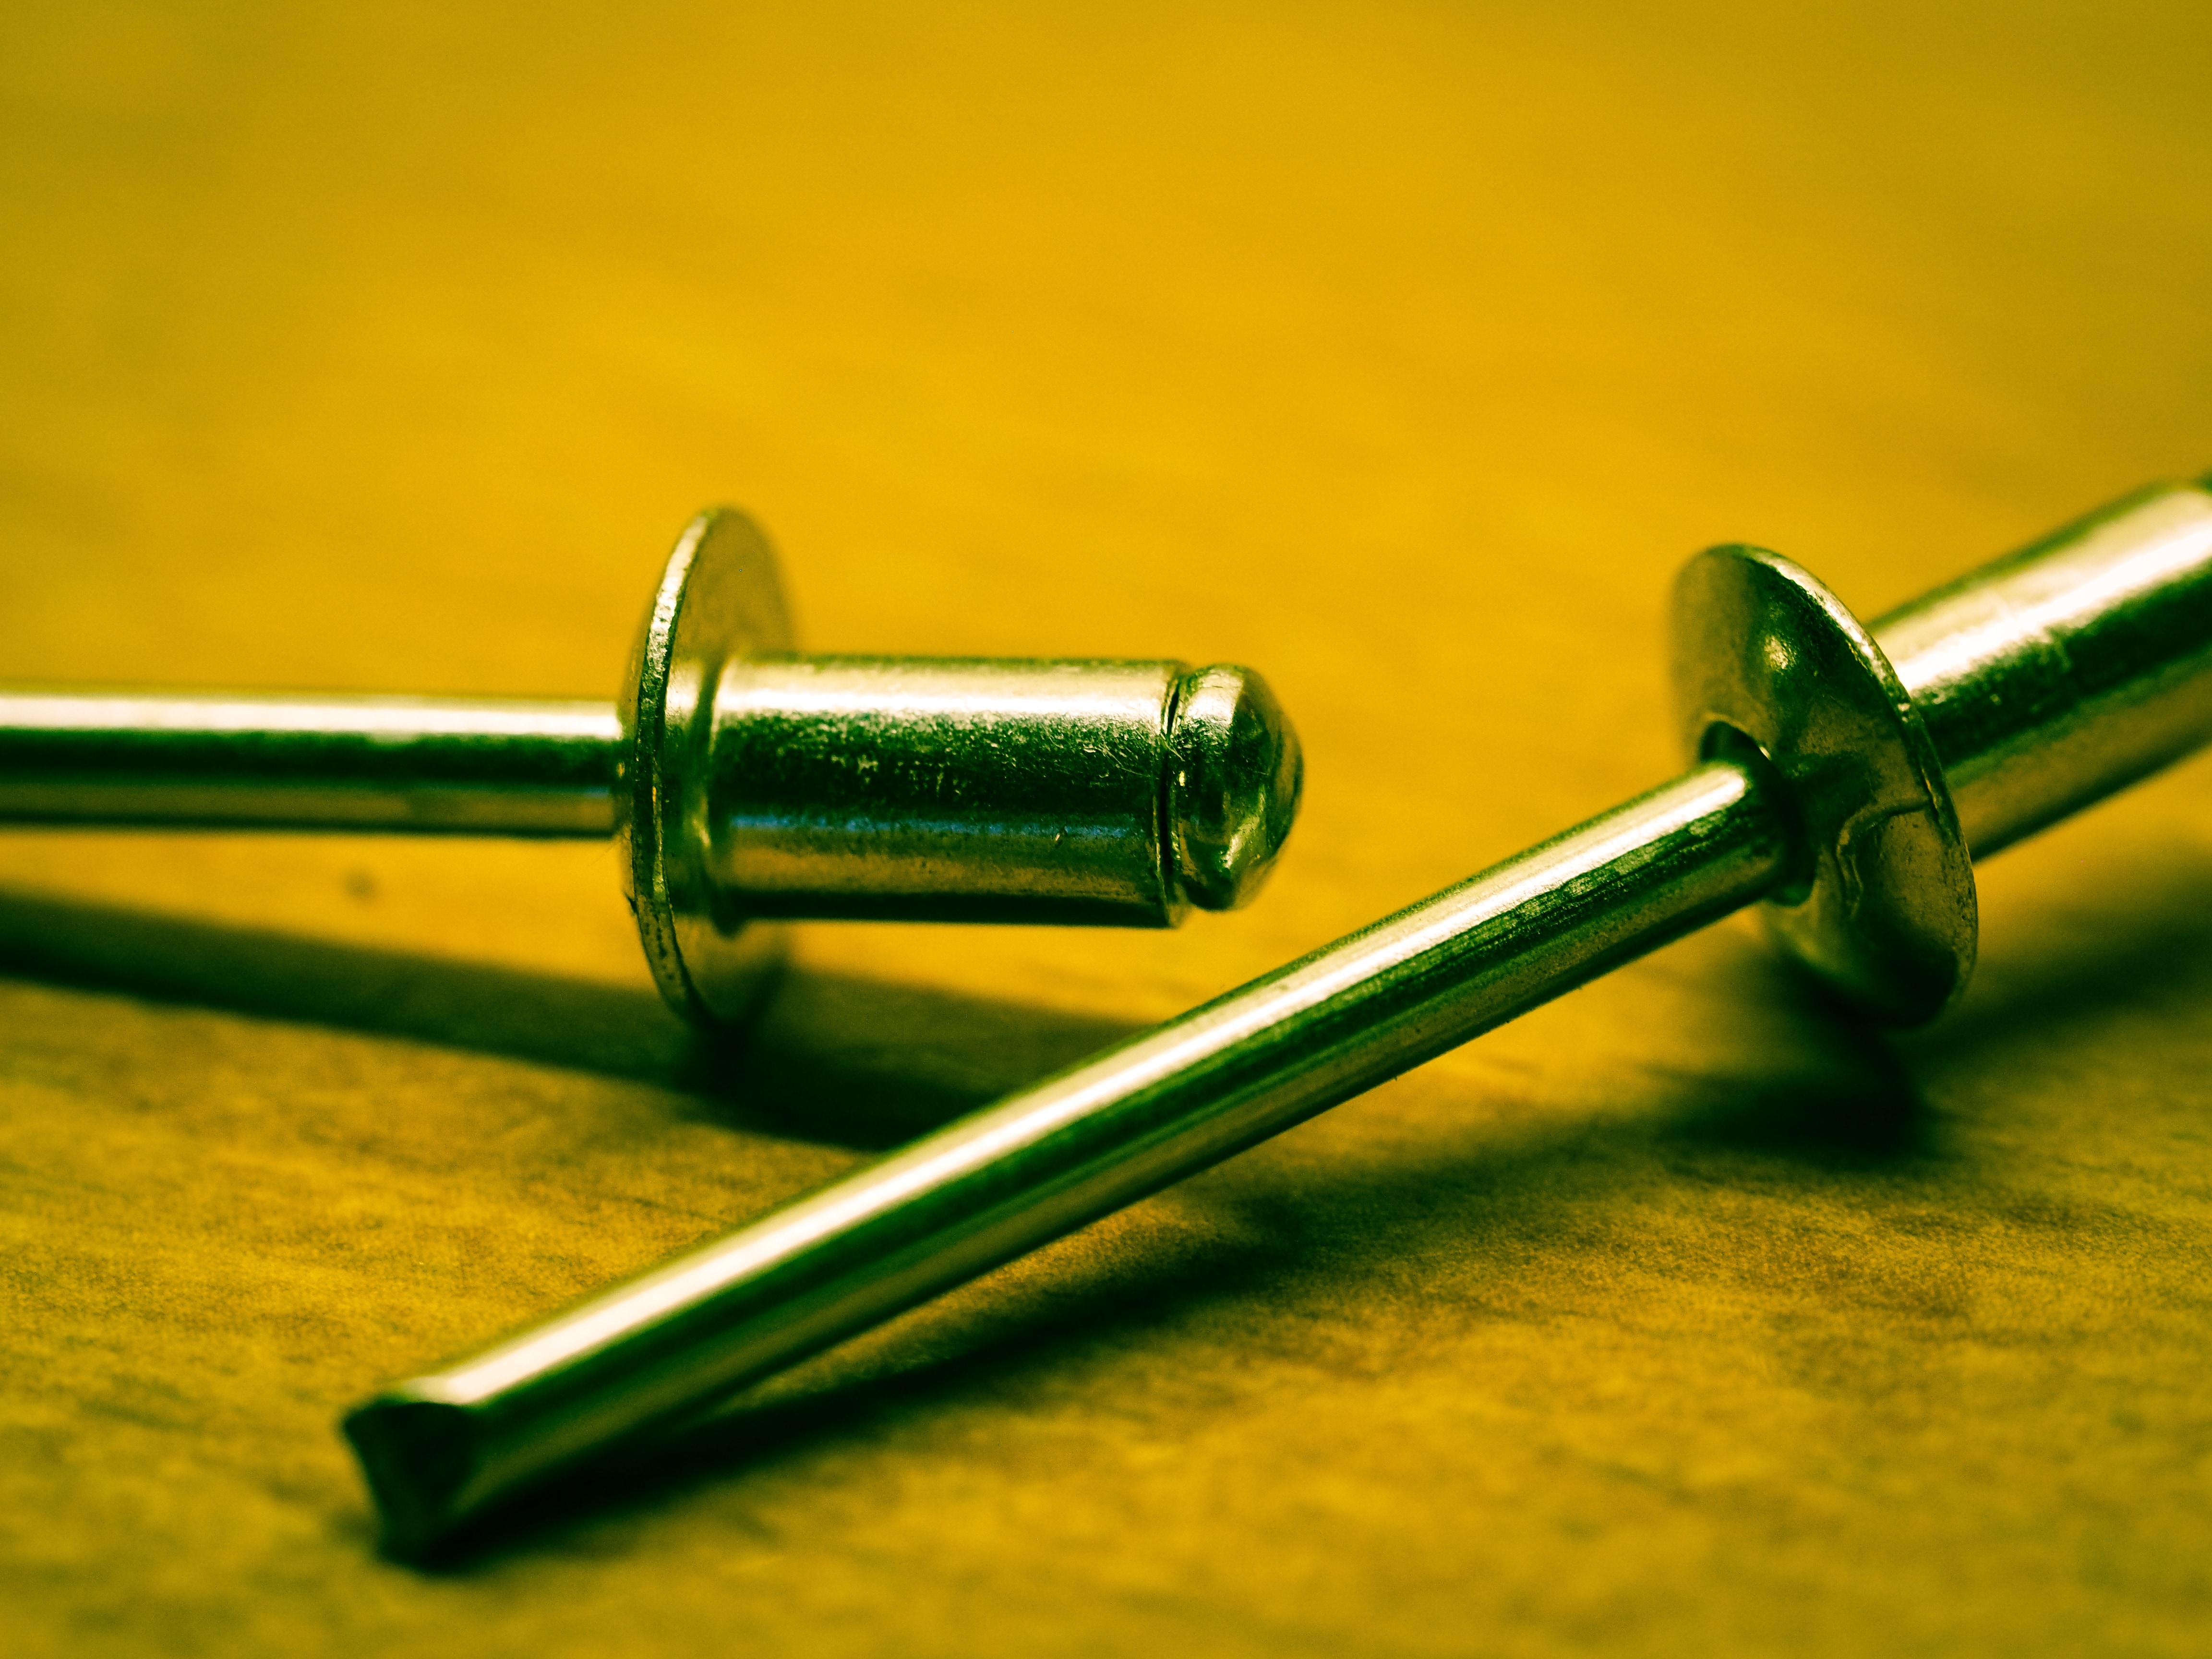 two stainless steel pins